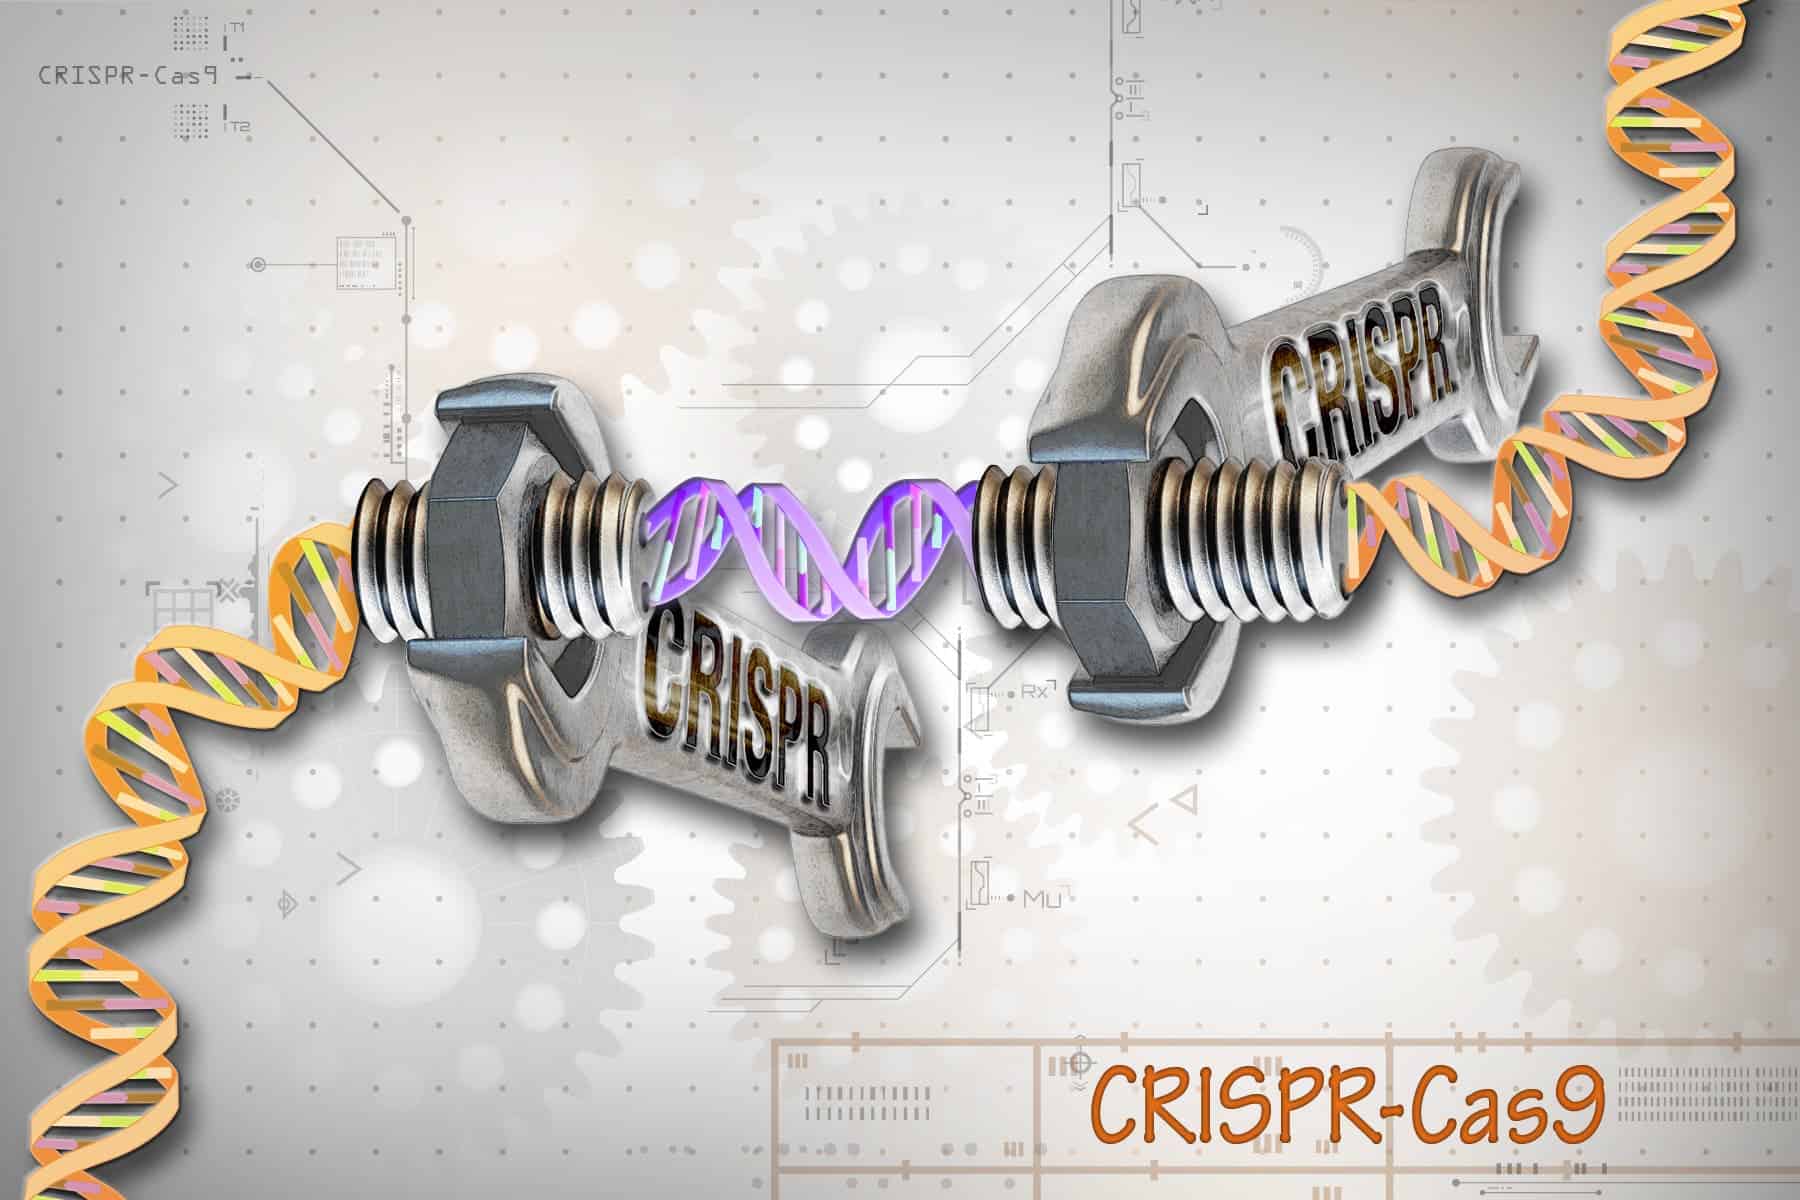 CRISPR-Cas9 is a customizable tool that lets scientists cut and insert small pieces of DNA at precise areas along a DNA strand.  Credits: National Human Genome Research Institute (NHGRI) from Bethesda, MD, USA.